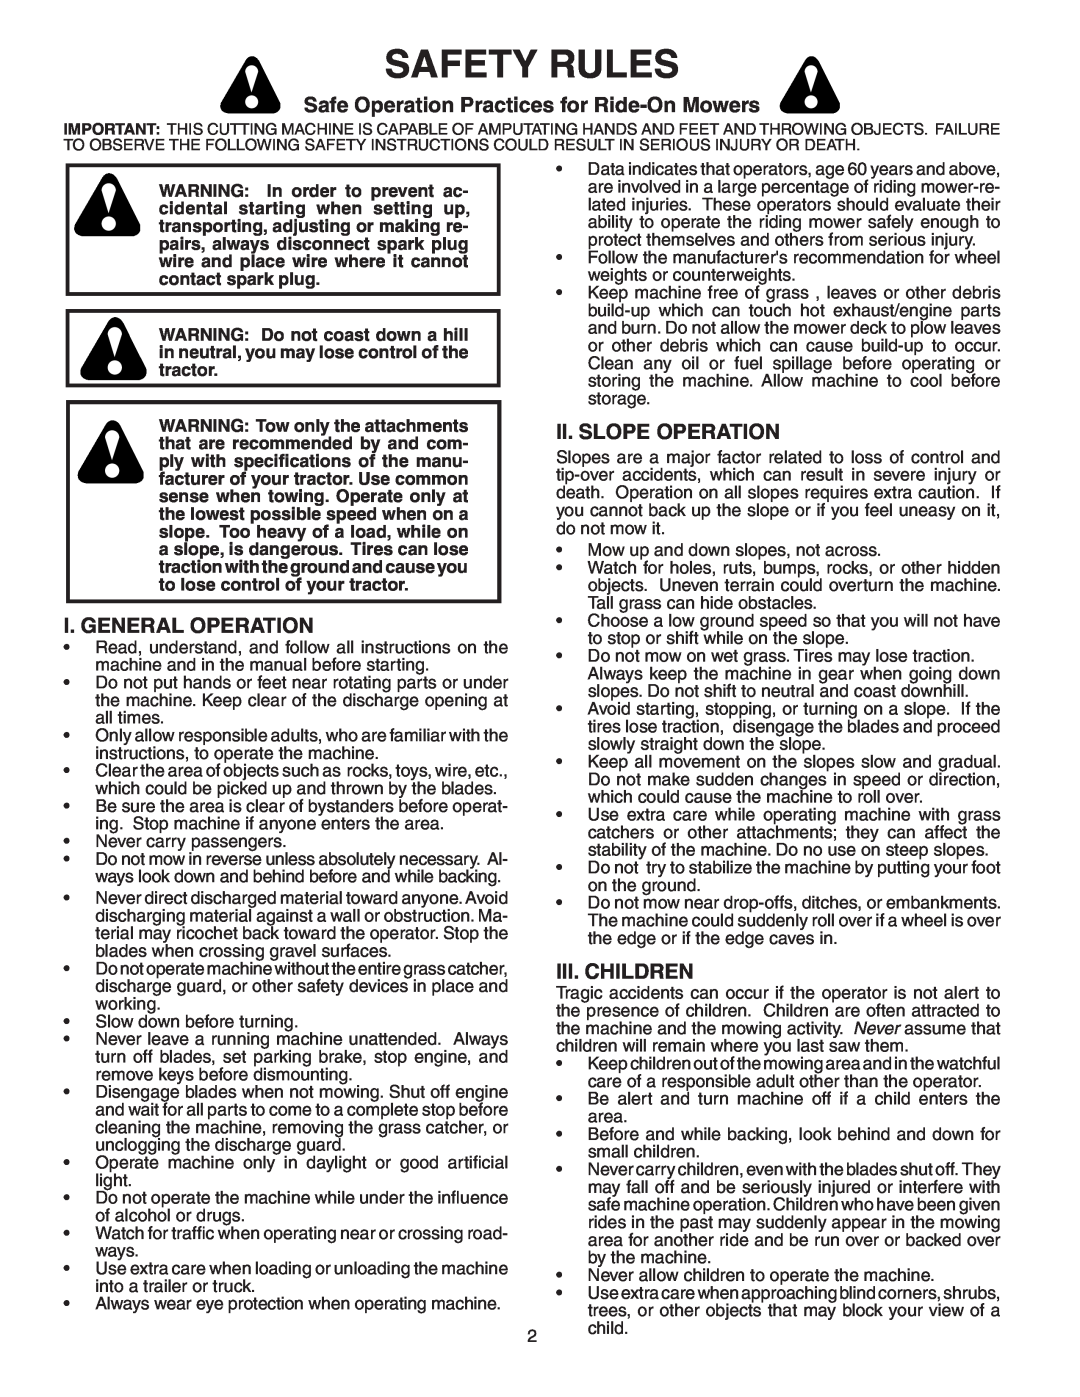 Poulan 402337, QCT342 Safety Rules, Safe Operation Practices for Ride-OnMowers, I. General Operation, Ii. Slope Operation 